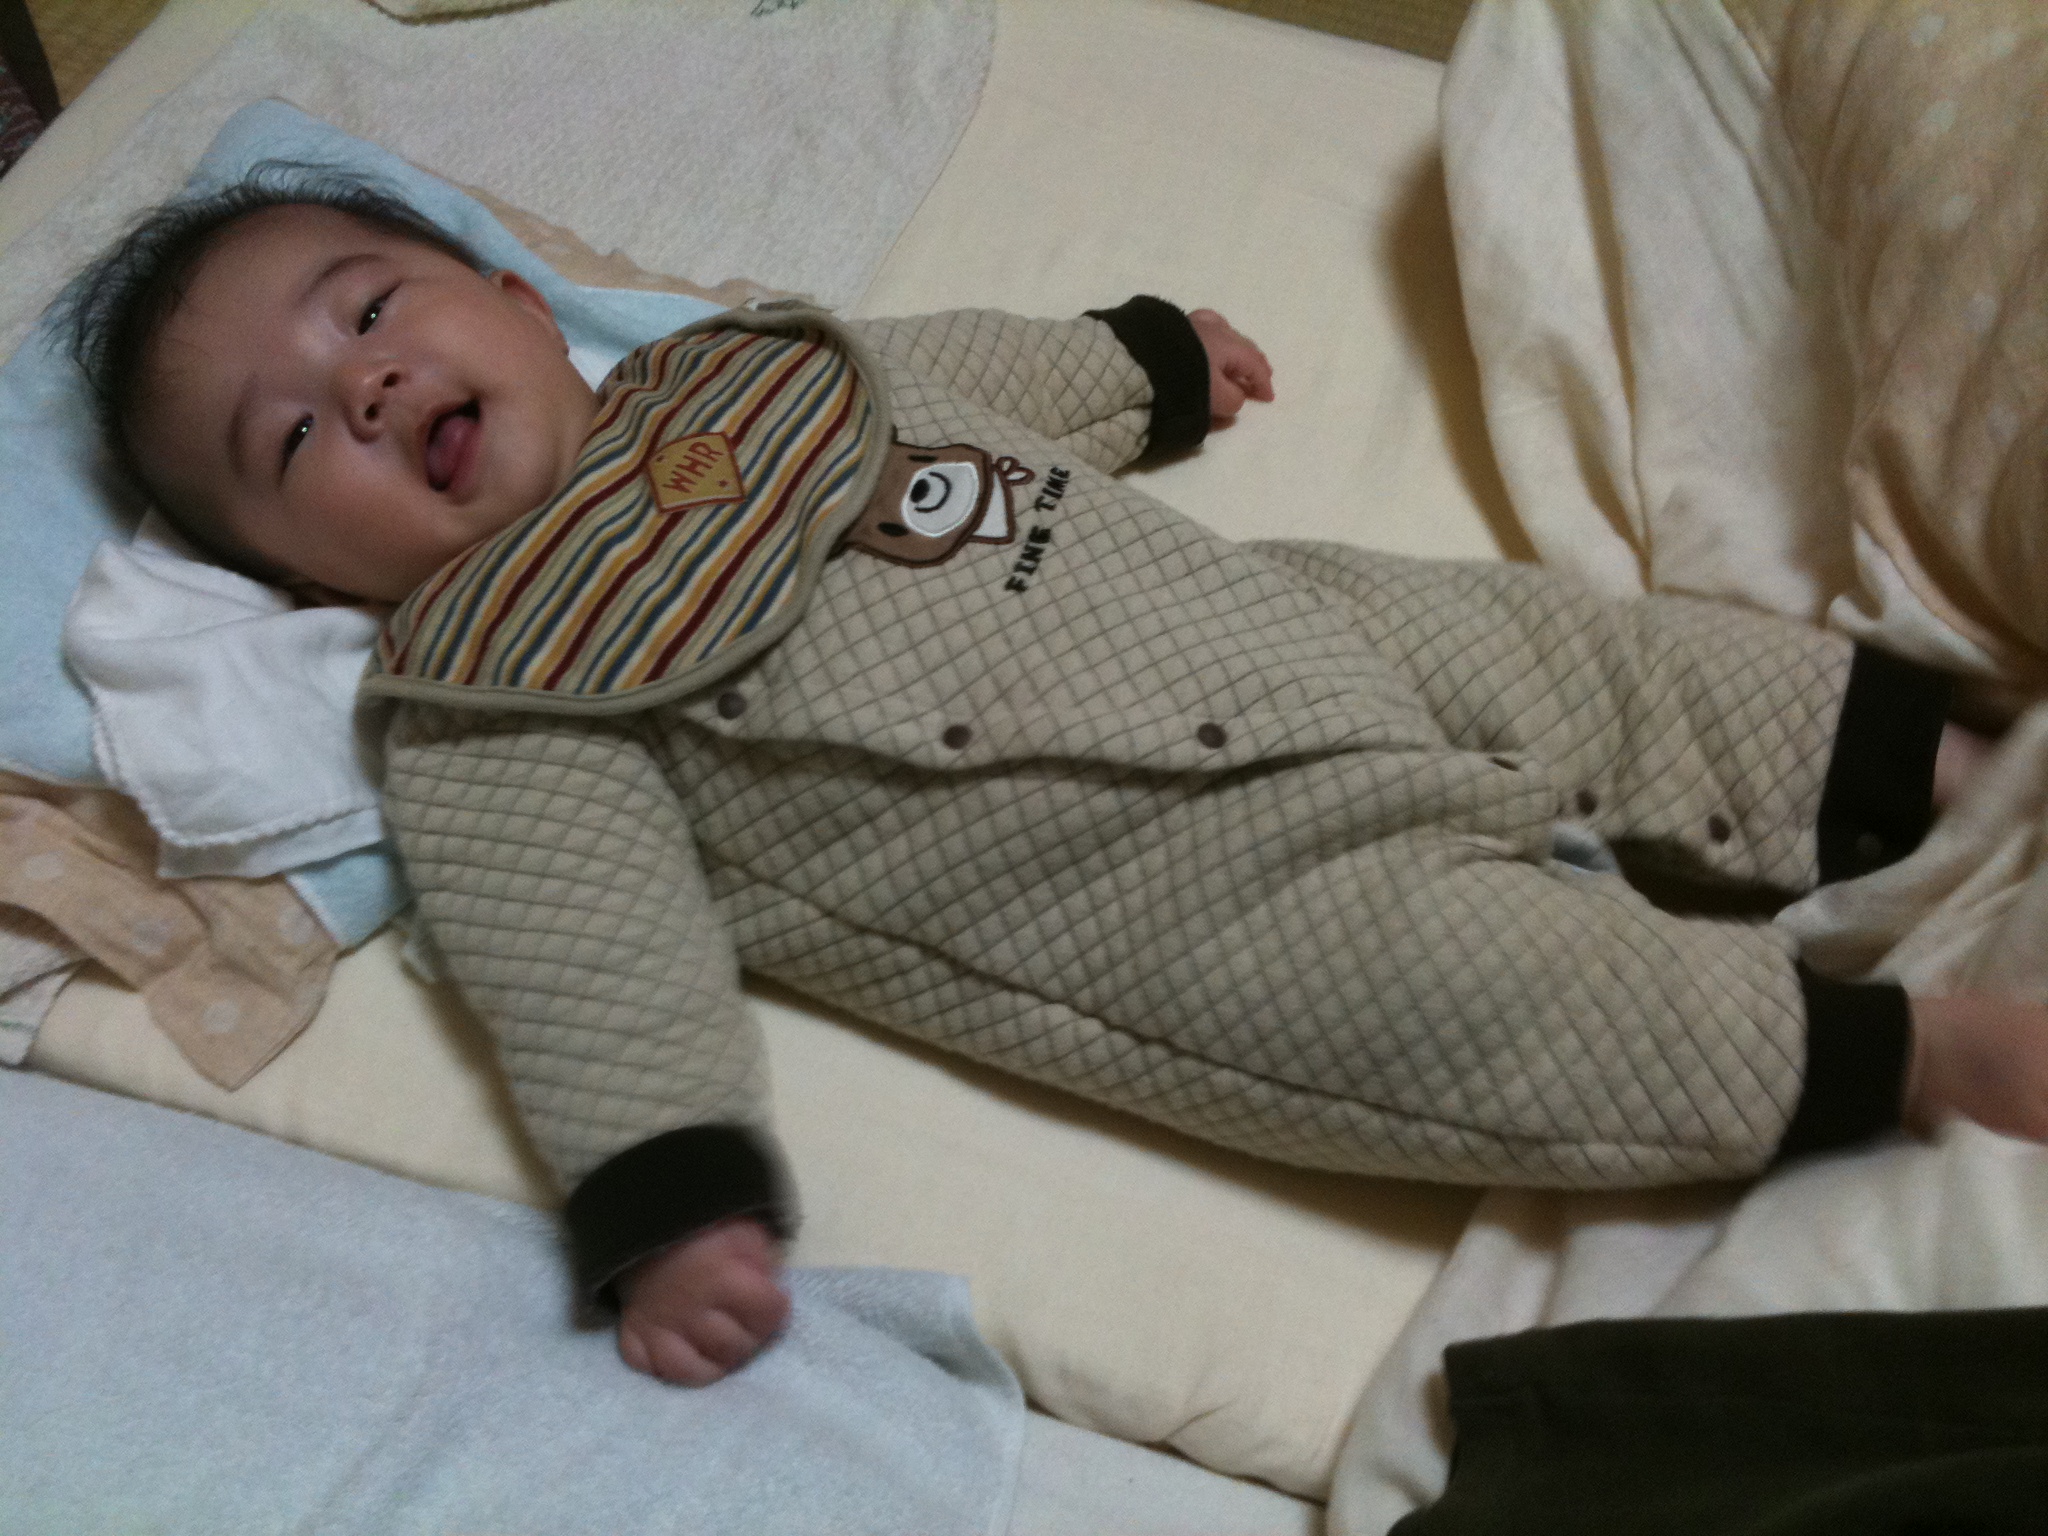 a baby lying on a bed holding a mitt